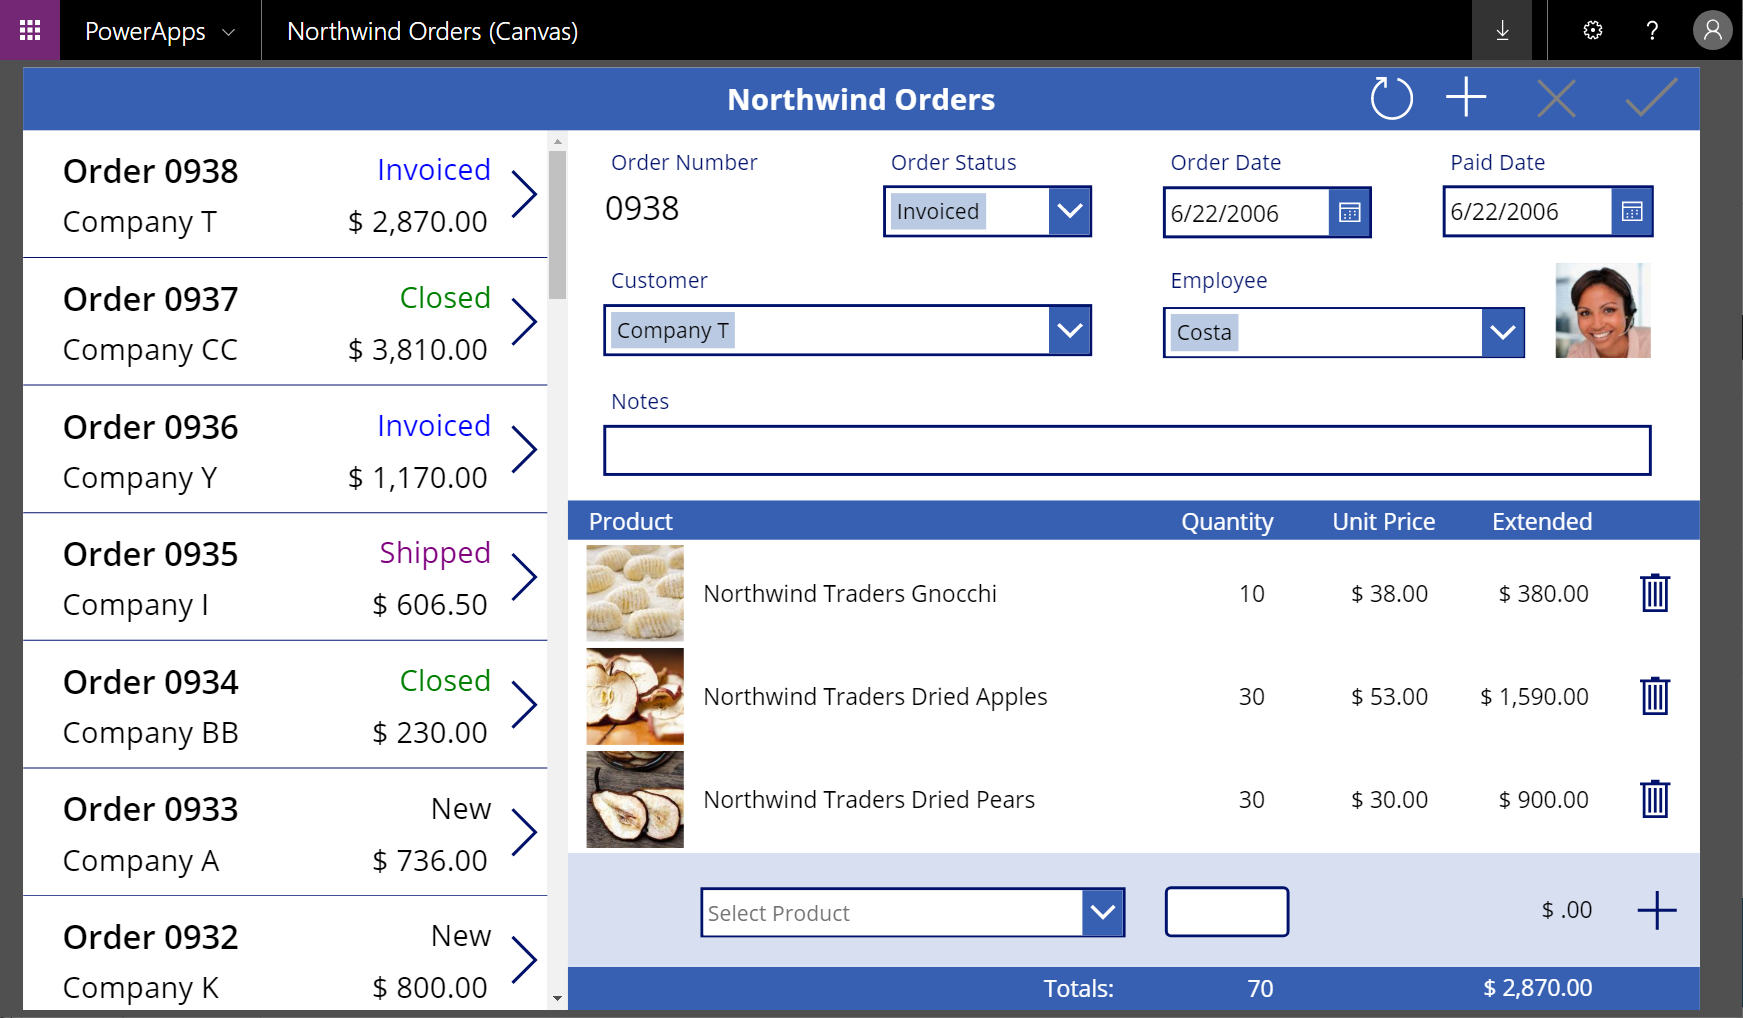 List of orders and details in Northwind canvas app.